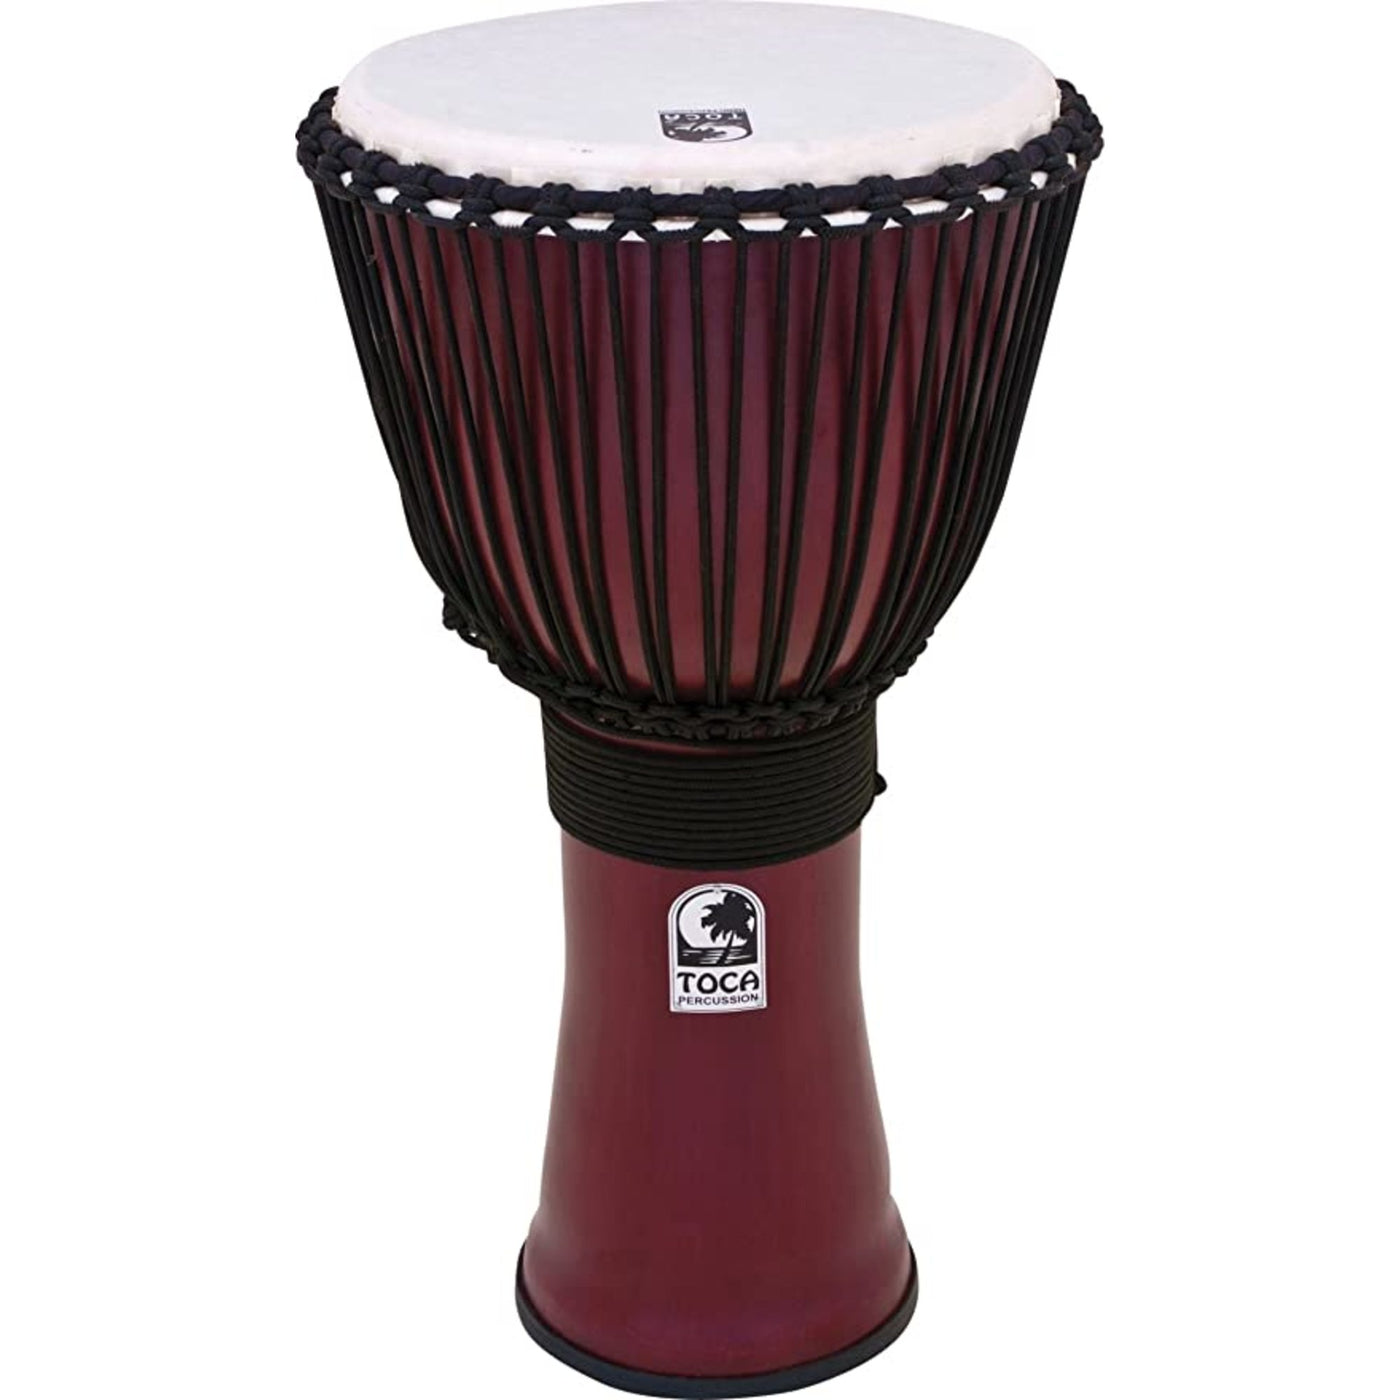 Toca Freestyle II Rope Tuned 10-Inch Djembe in African Dance Finish TF2DJ-10AD)